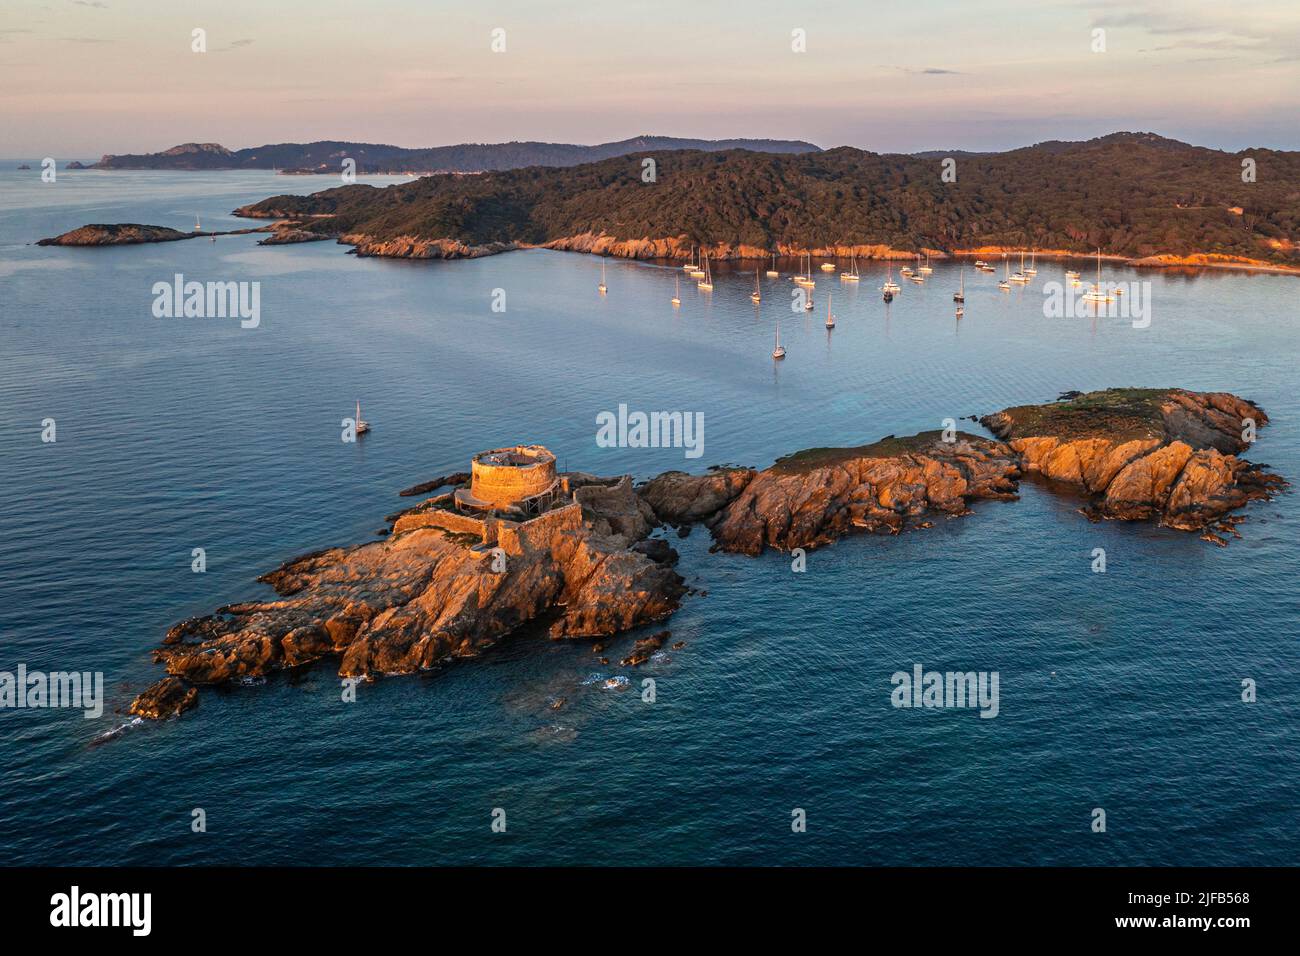 France, Var, Iles d'Hyeres, Parc National de Port Cros (National park of Port Cros), Porquerolles island, the 17th century Fort du Petit Langoustier on its island and Porquerolles in the background (aerial view) Stock Photo